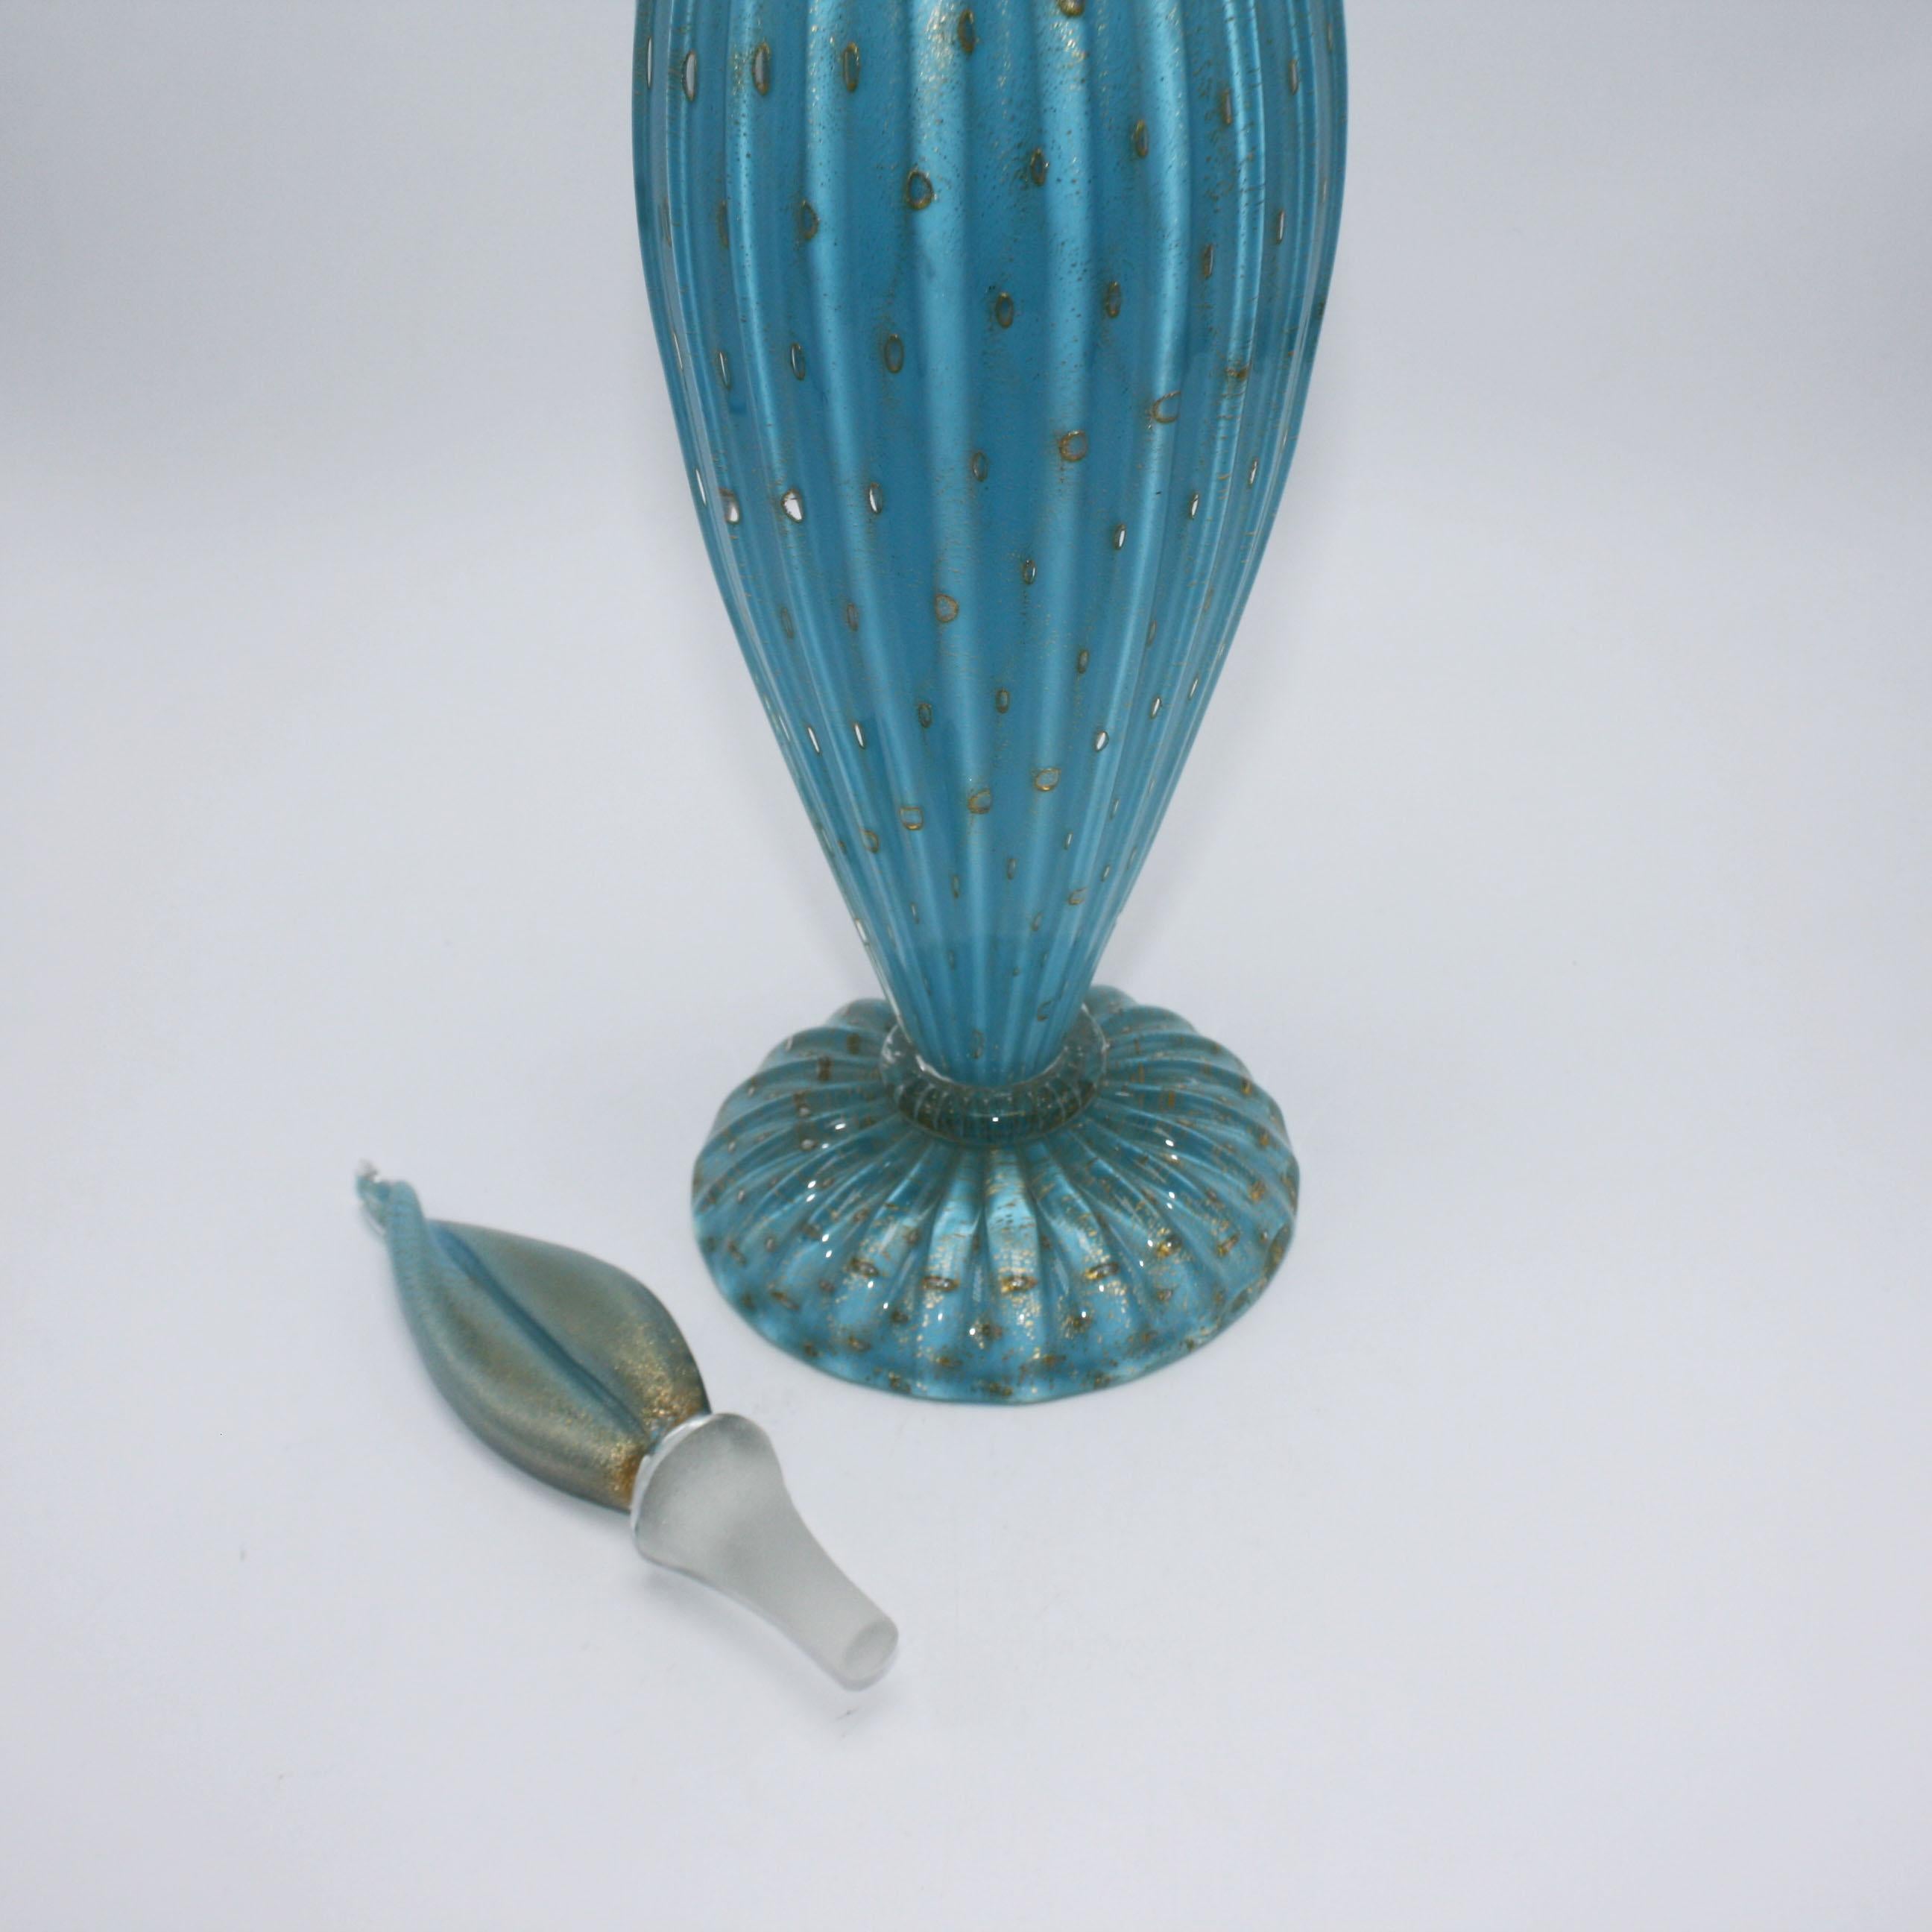 Blue Murano glass decanter with gold inclusions, circa 1950.